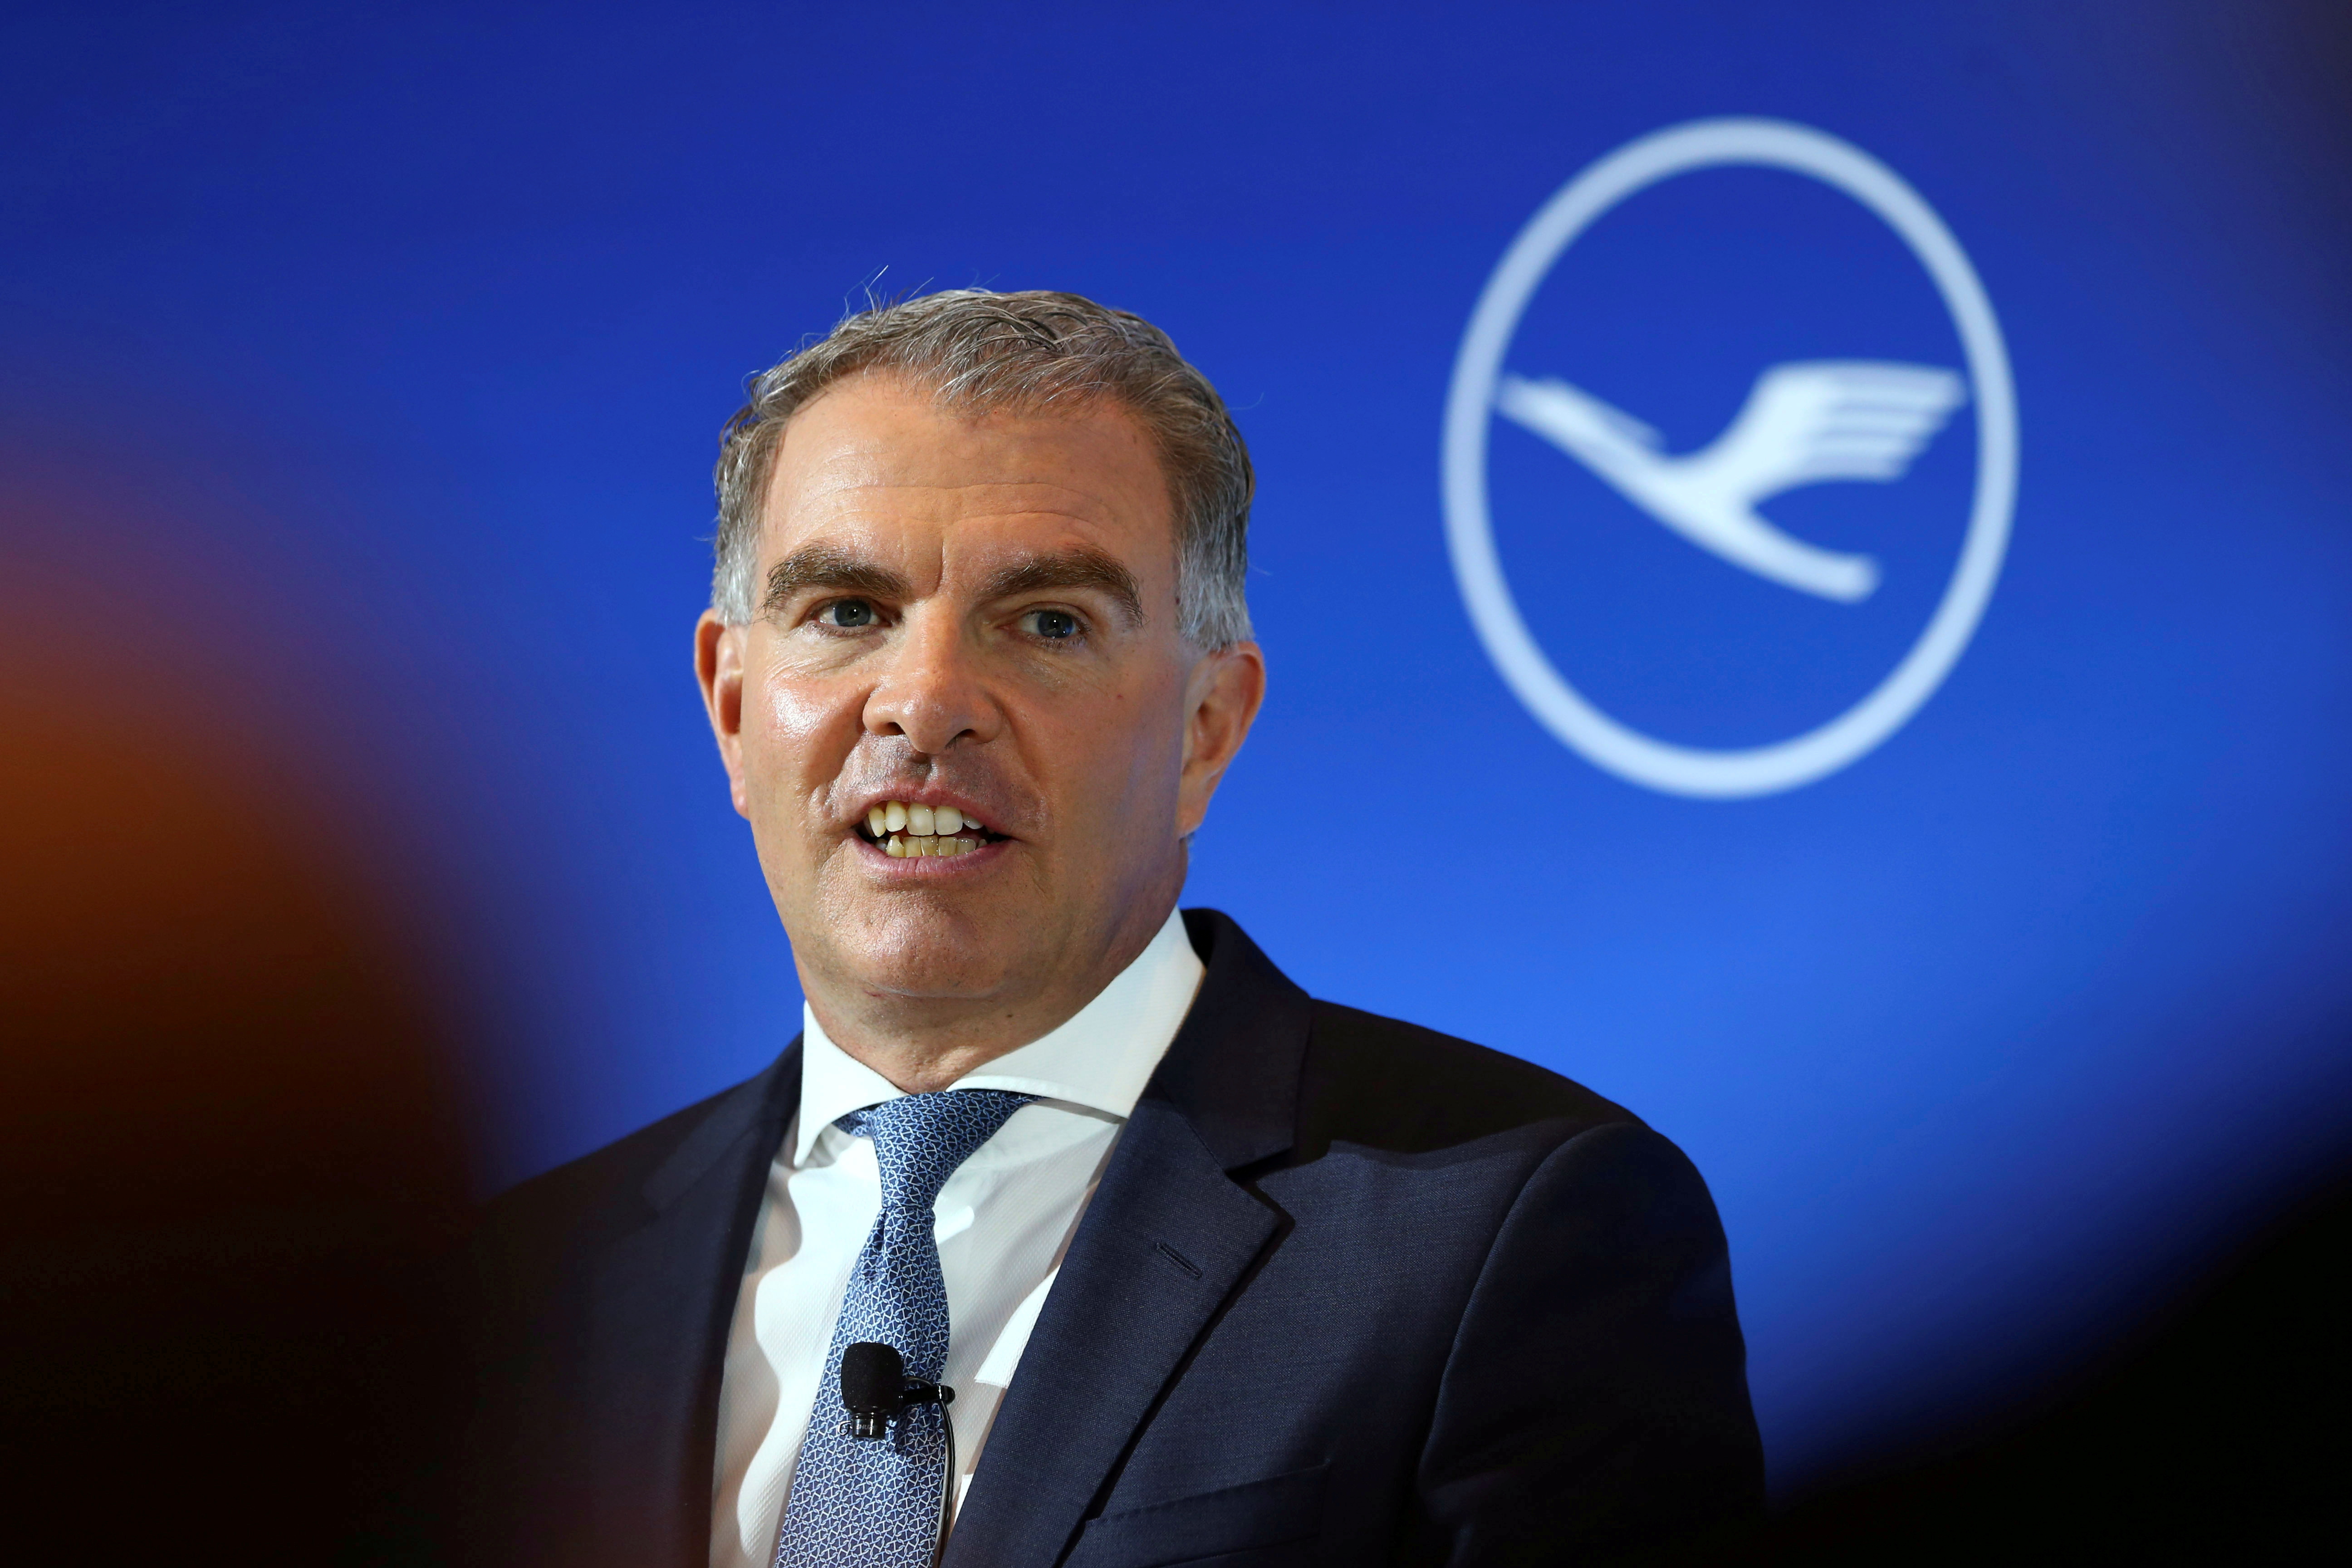 German airline Lufthansa's Chief Executive Officer Spohr attends the company's annual news conference in Frankfurt